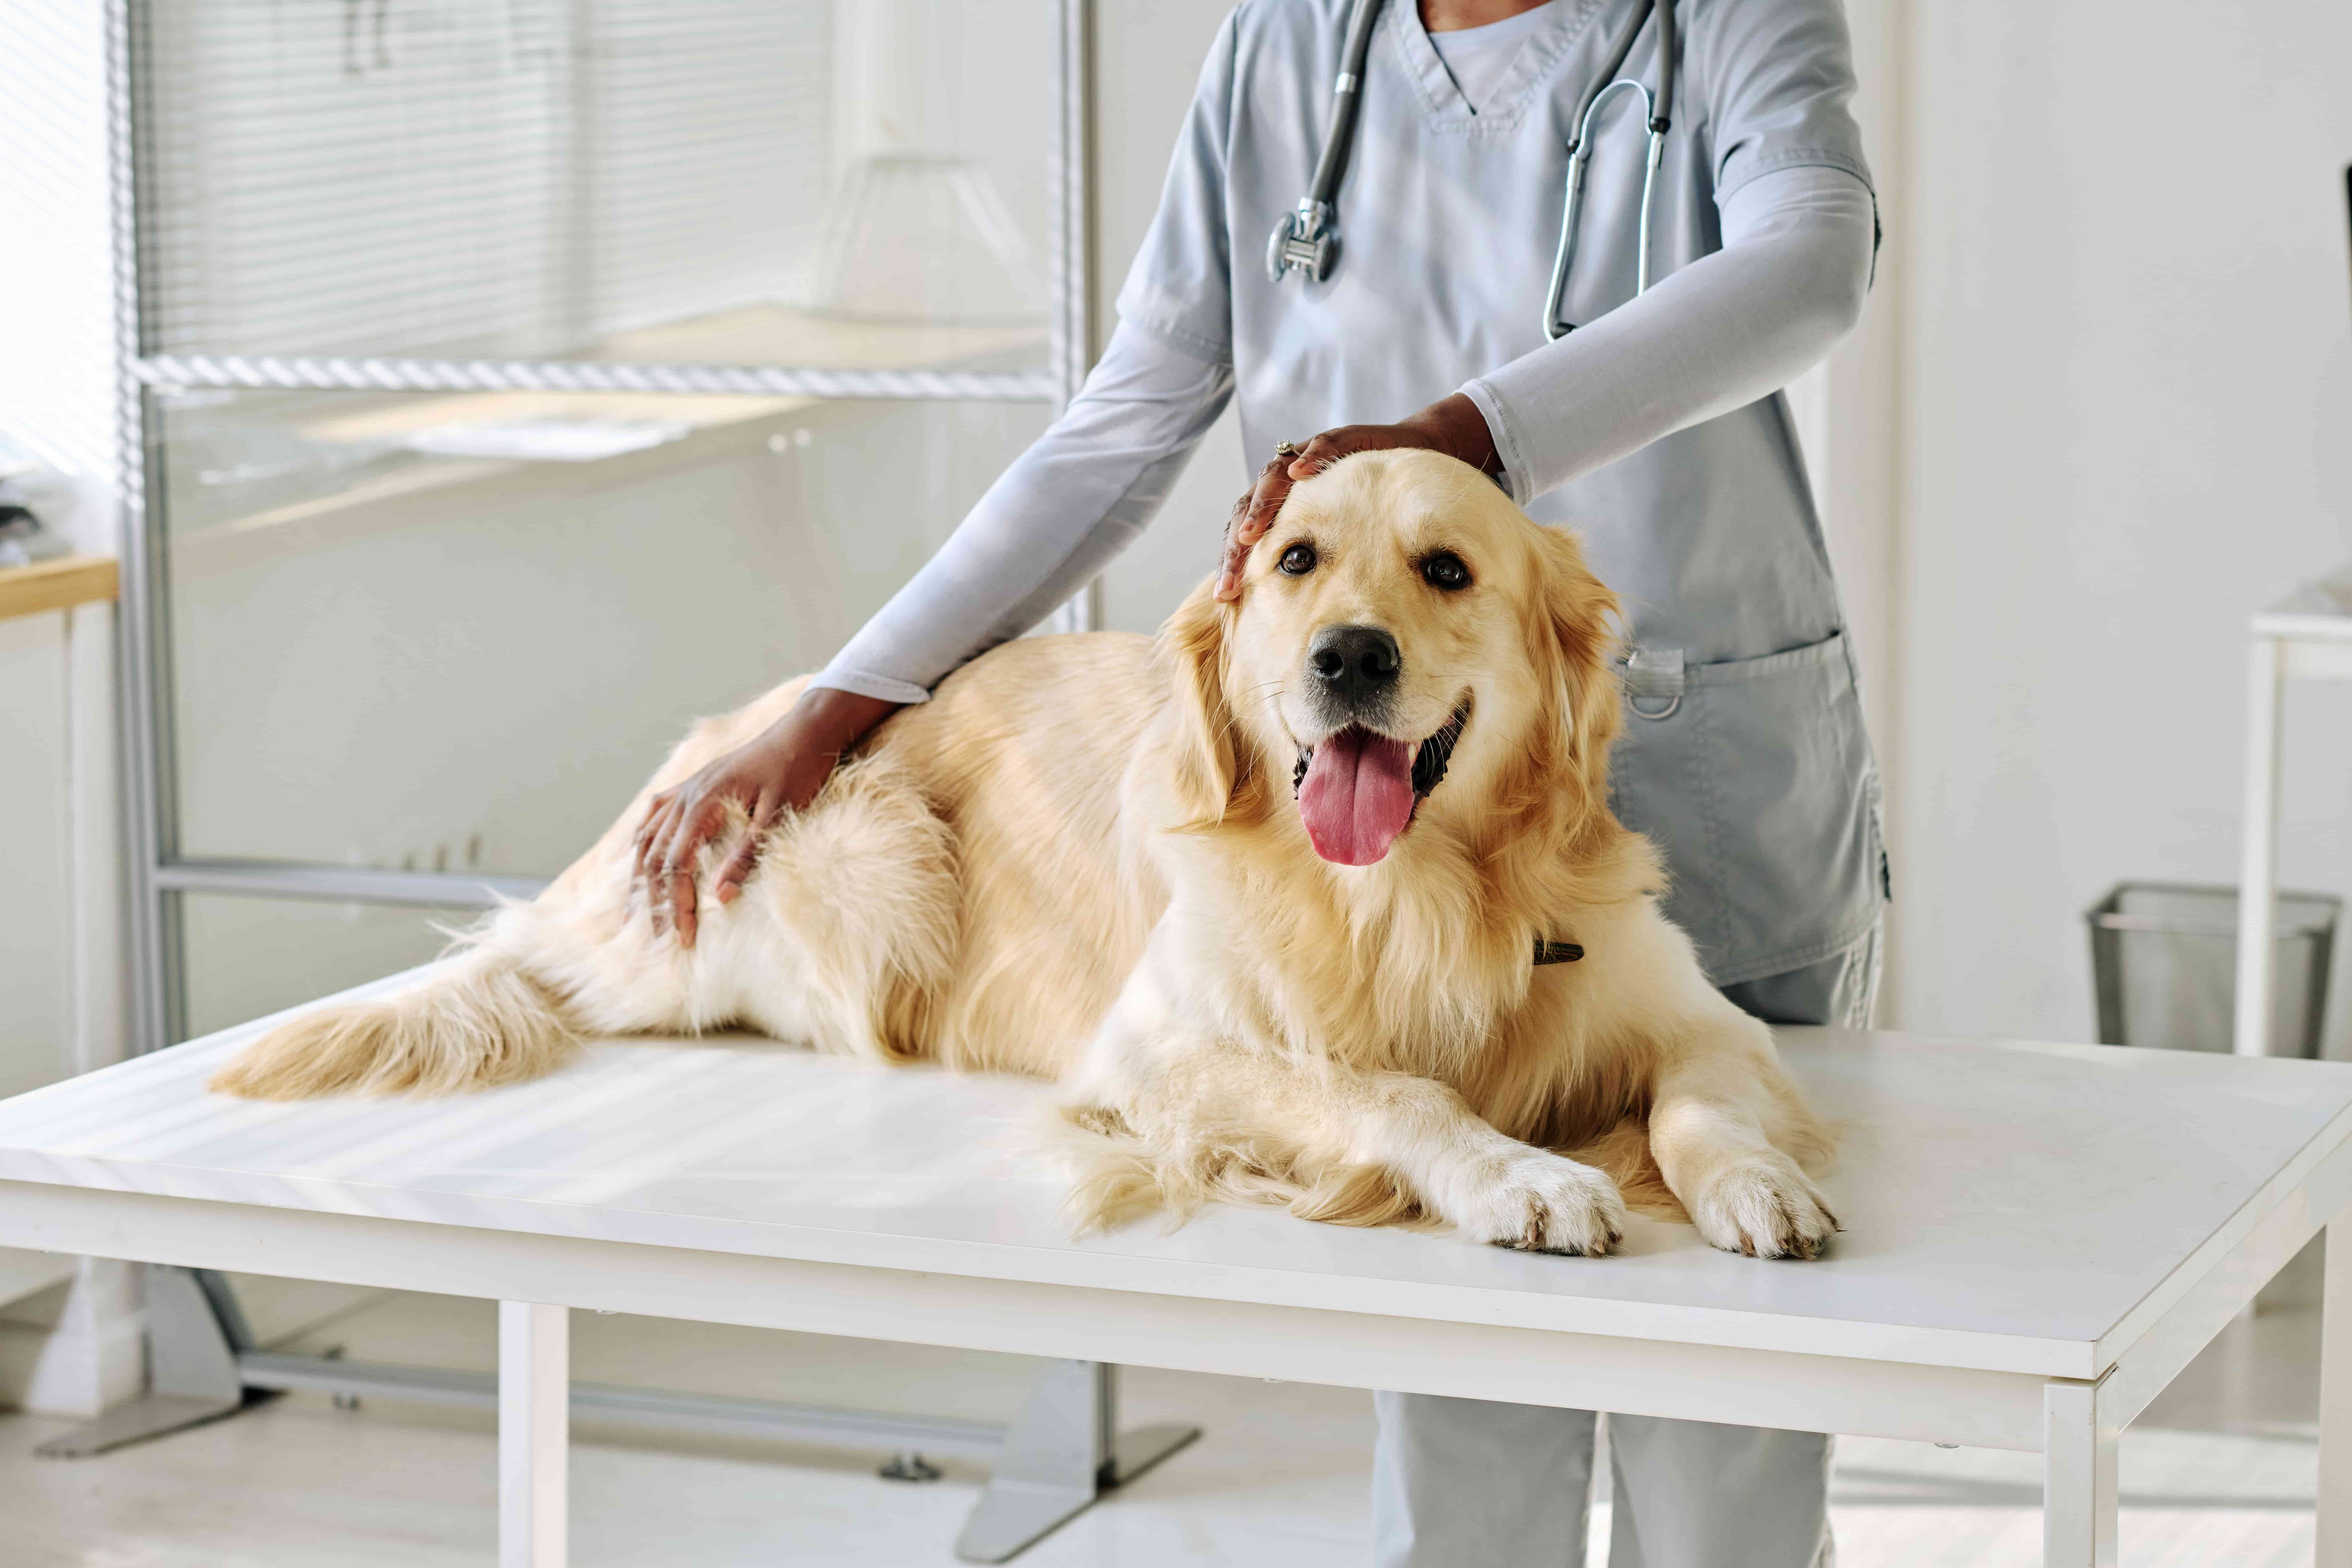 Get to Know The Type of Dog and How to Care for It